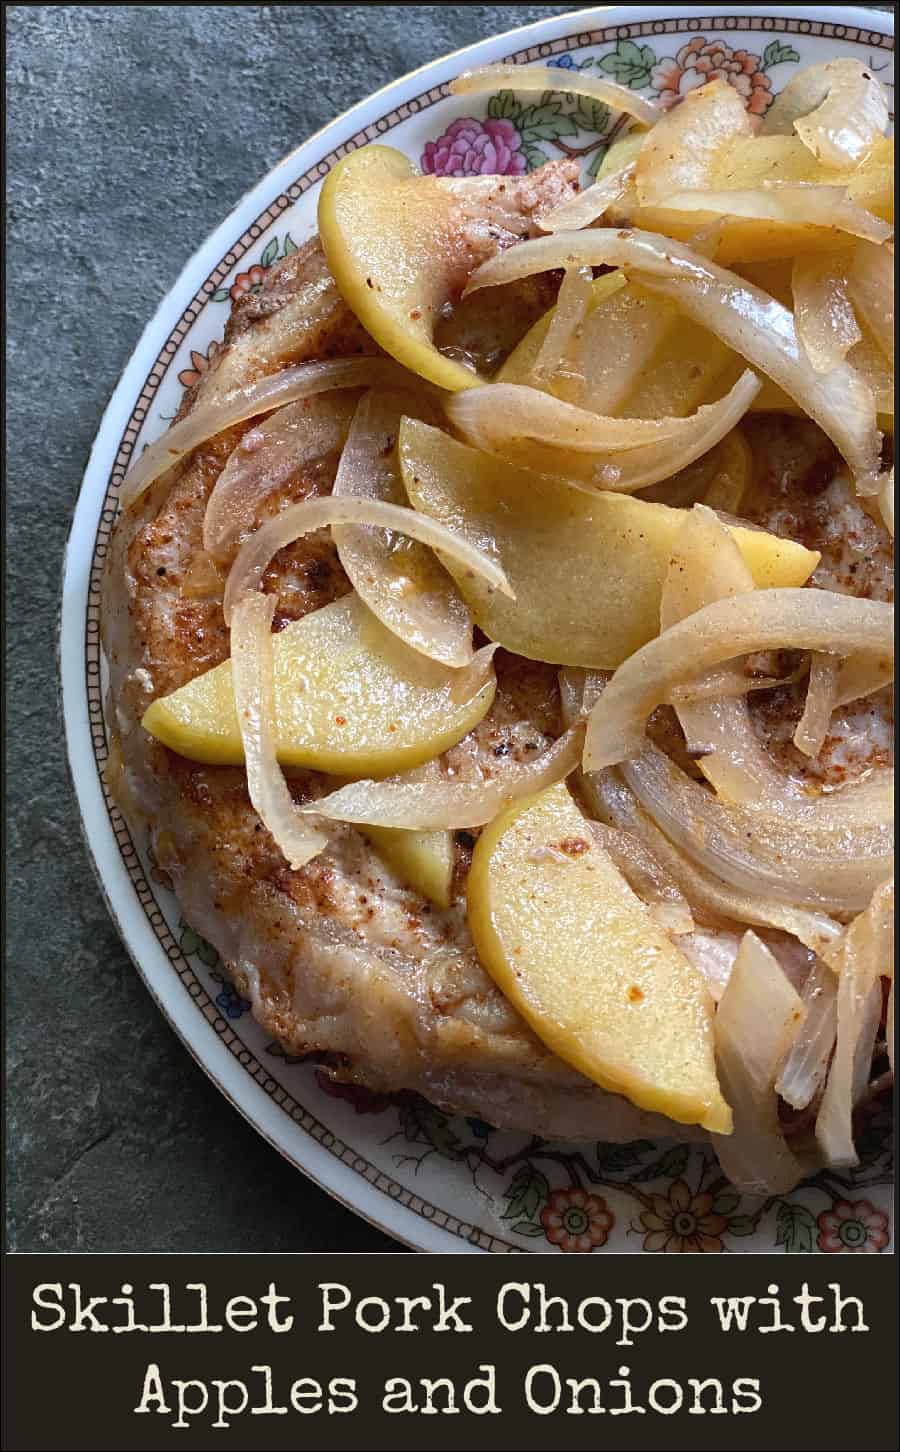 Skillet Pork Chops with Apples and Onions